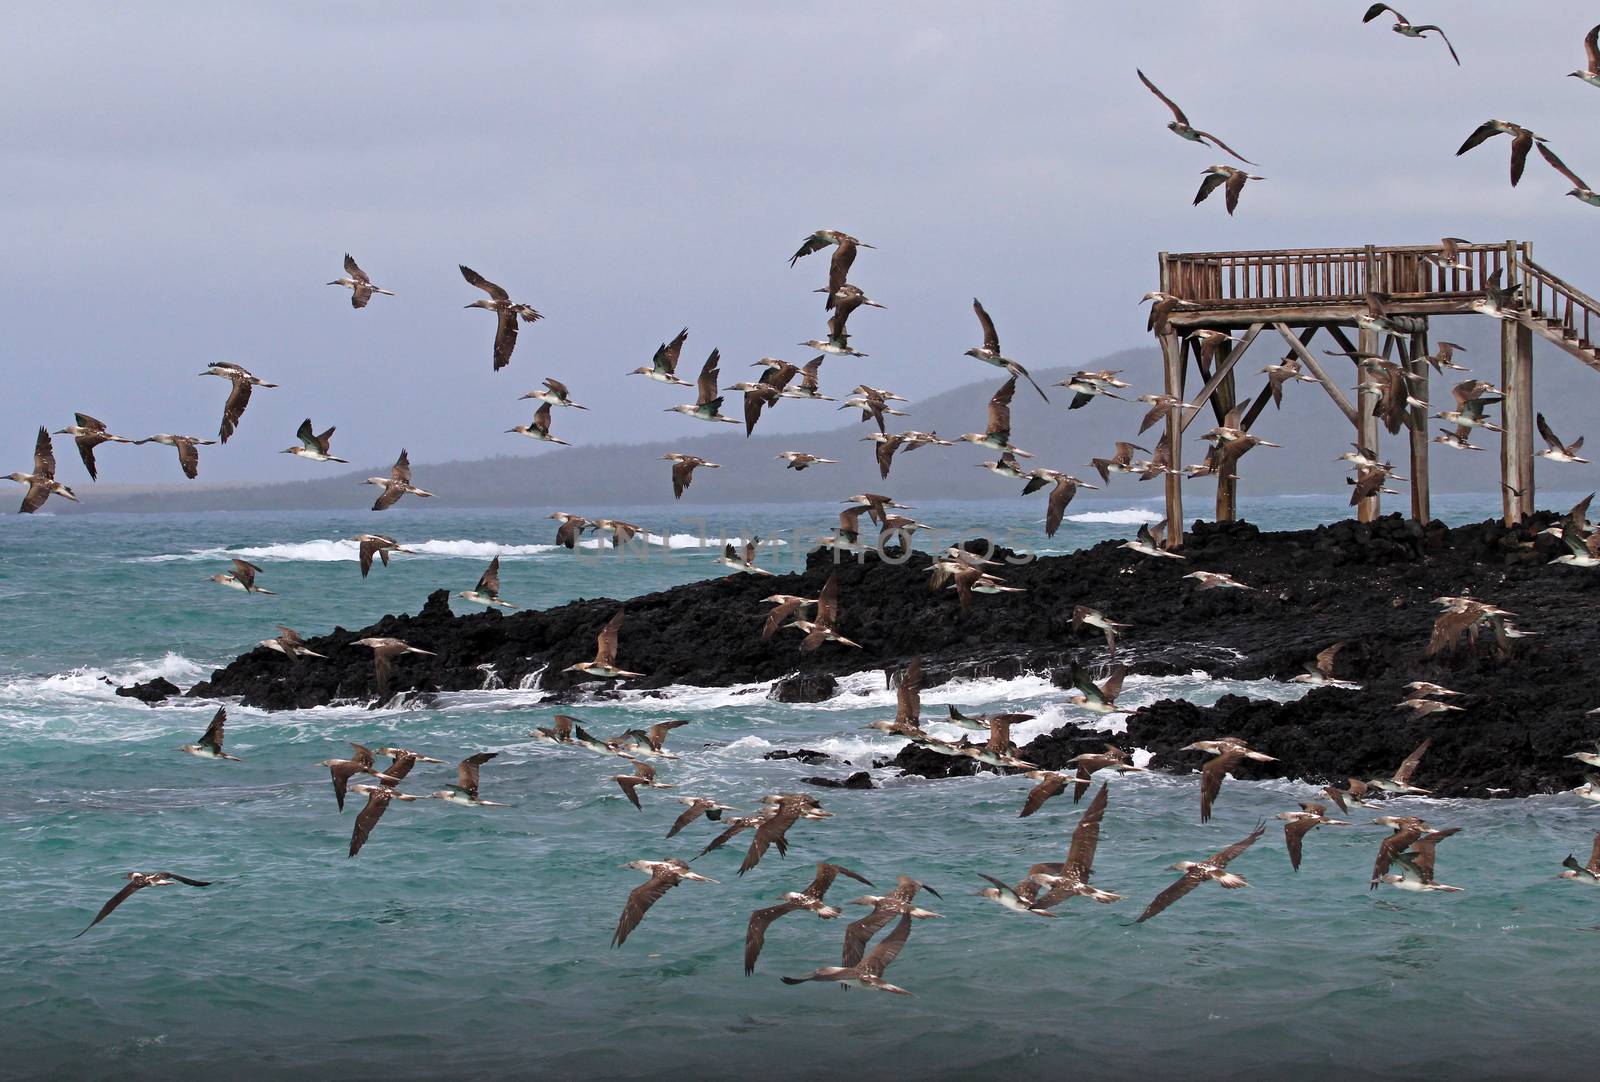 Blue footed boobies flying and fishing, Galapagos by cicloco